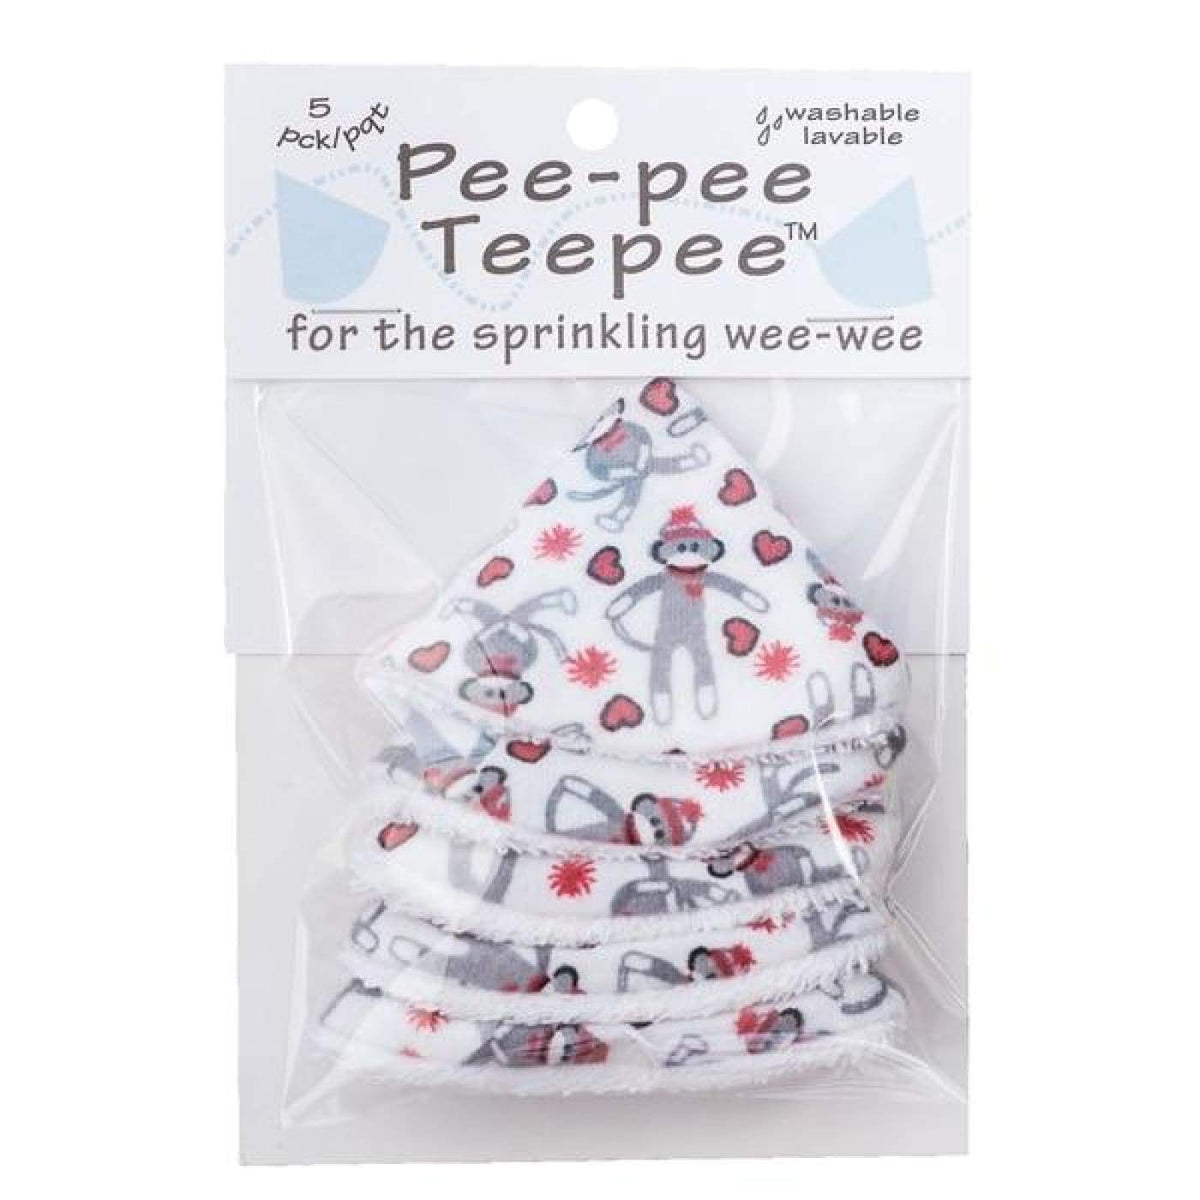 Pee-pee Teepee - Sock Monkey - BATHTIME &amp; CHANGING - NAPPIES/WIPES/ACCESSORIES